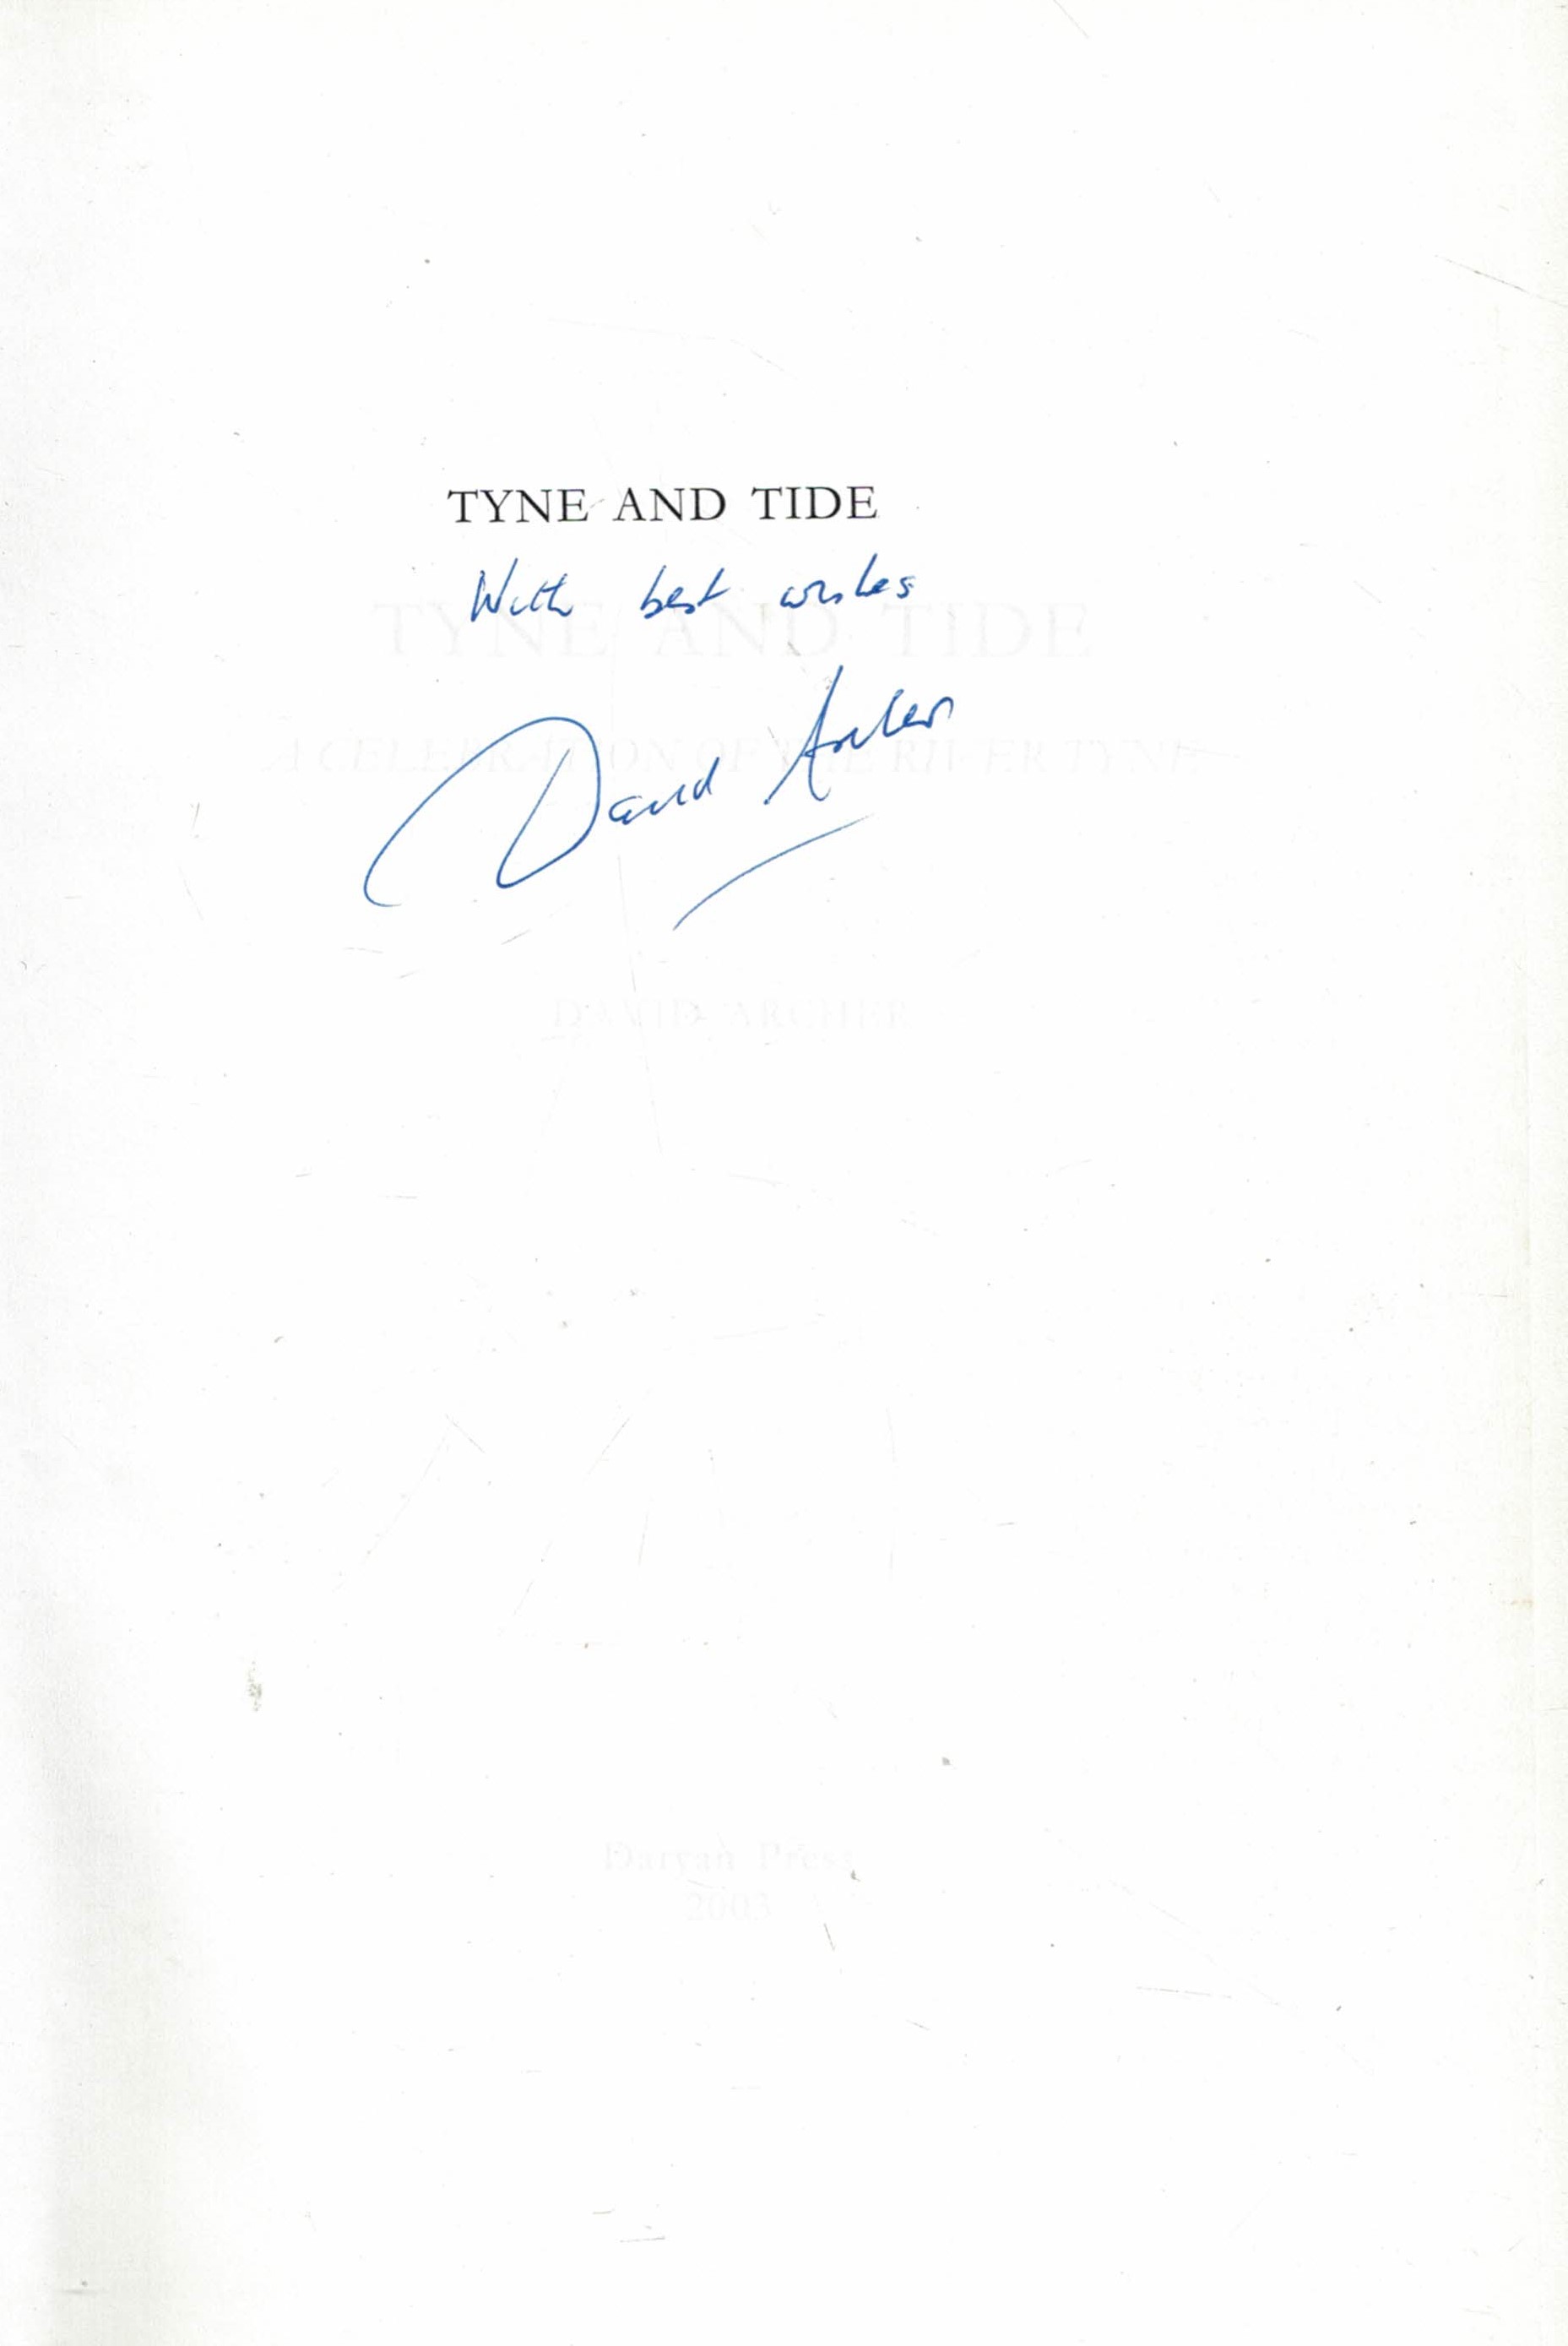 Tyne and Tide. A Celebration of the River Tyne. Signed copy.